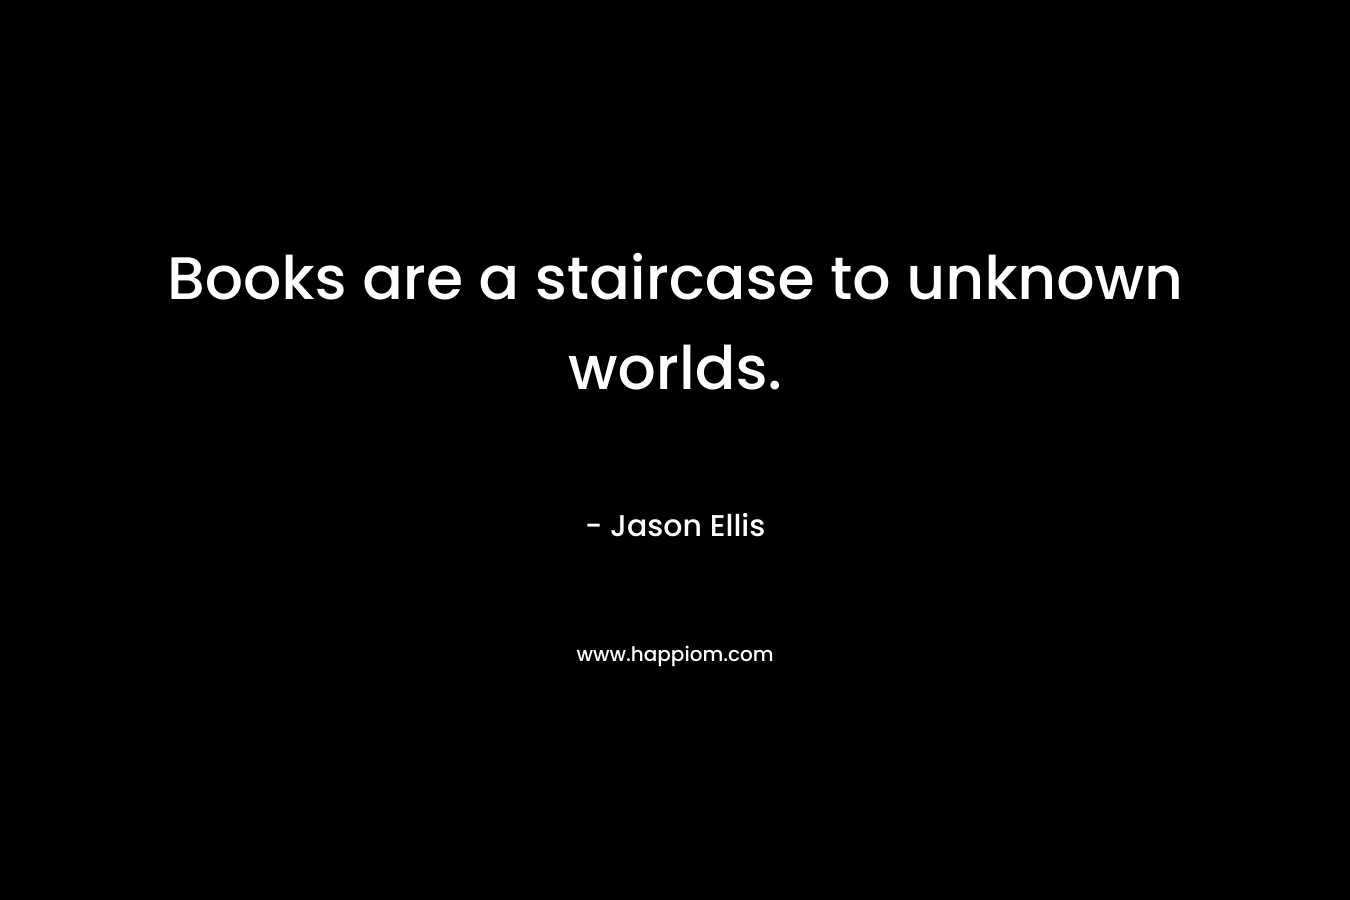 Books are a staircase to unknown worlds. – Jason Ellis